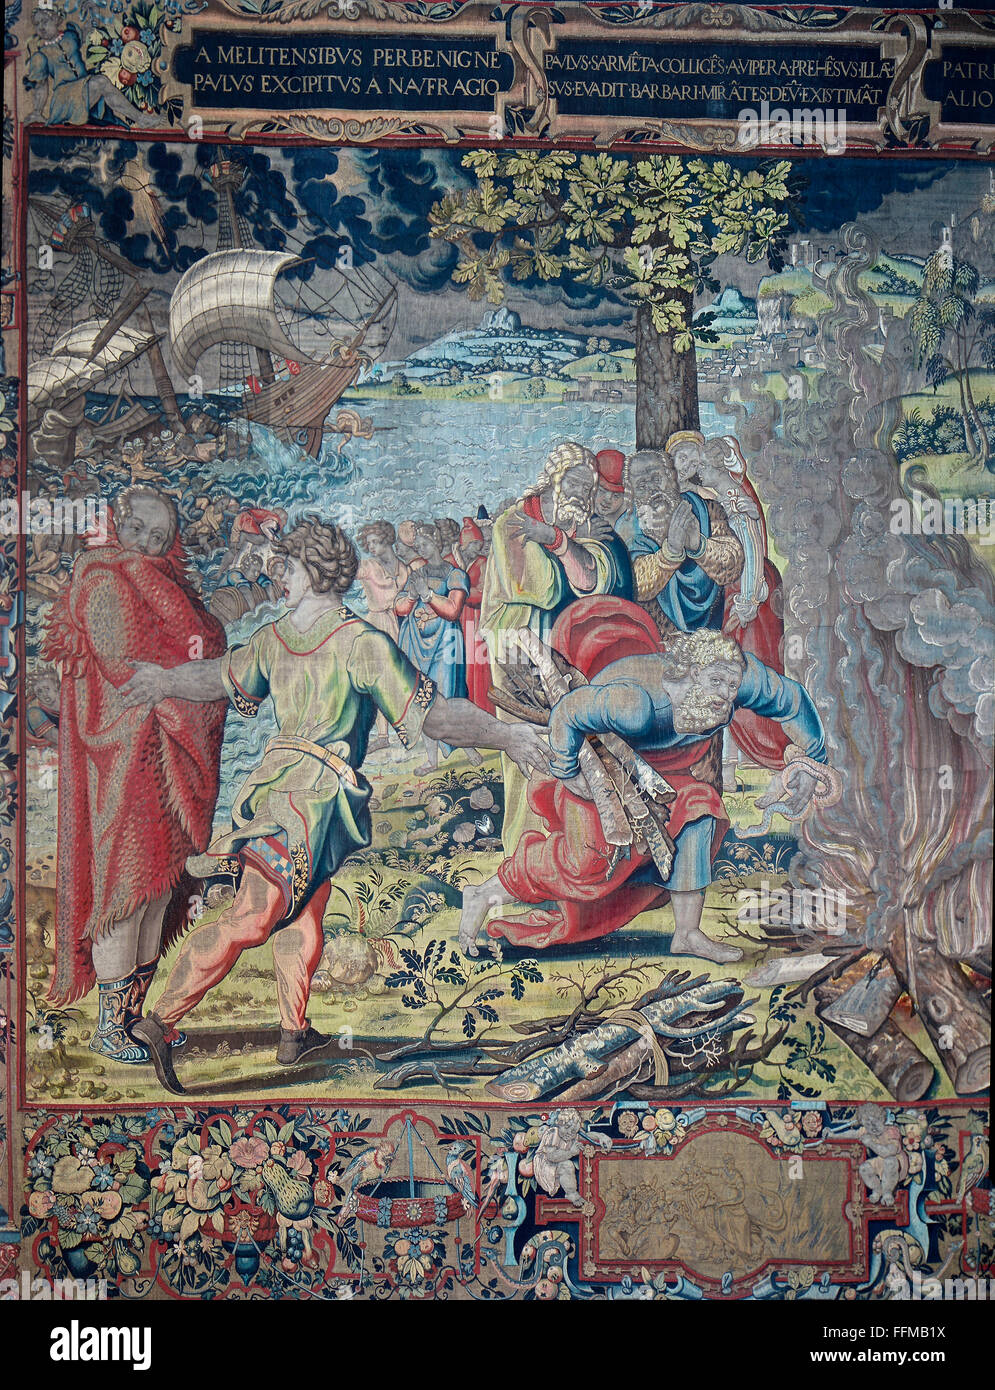 Paul, circa 1 - circa 64, Saint apostle, missionary, martyr, bitten by a viper on Malta, tapestry, detail, design by Pieter Coecke van Aelst (1502 - 1550), Bruxelles, circa 1540 / 1550, Bavarian National Museum, Munich, Germany, Stock Photo